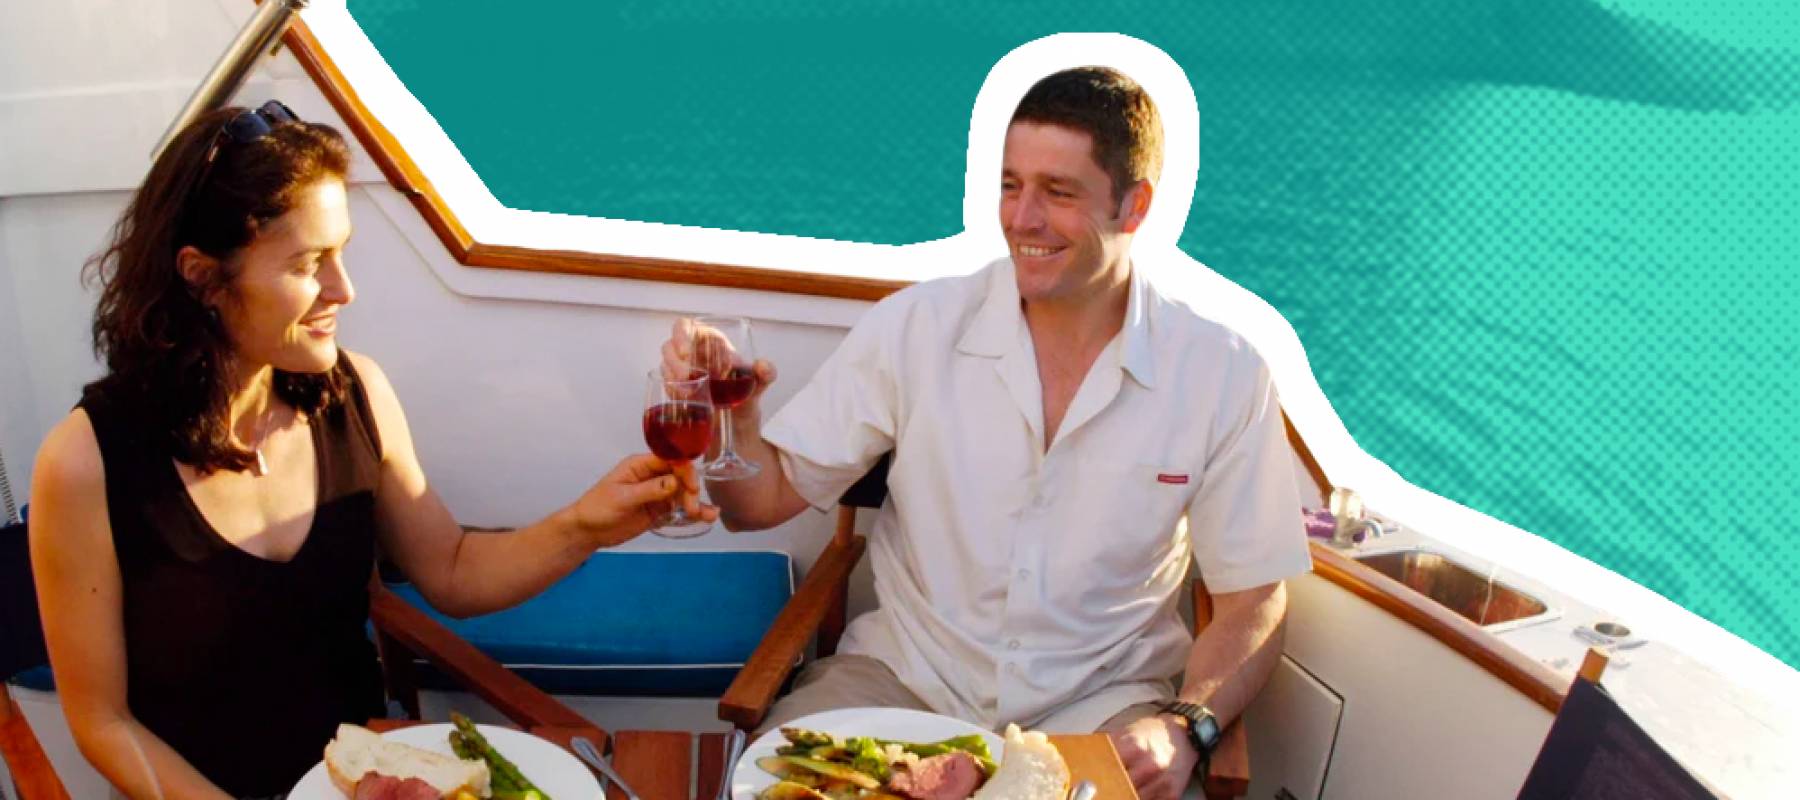 Older couple clink glasses while sitting on a yacht.